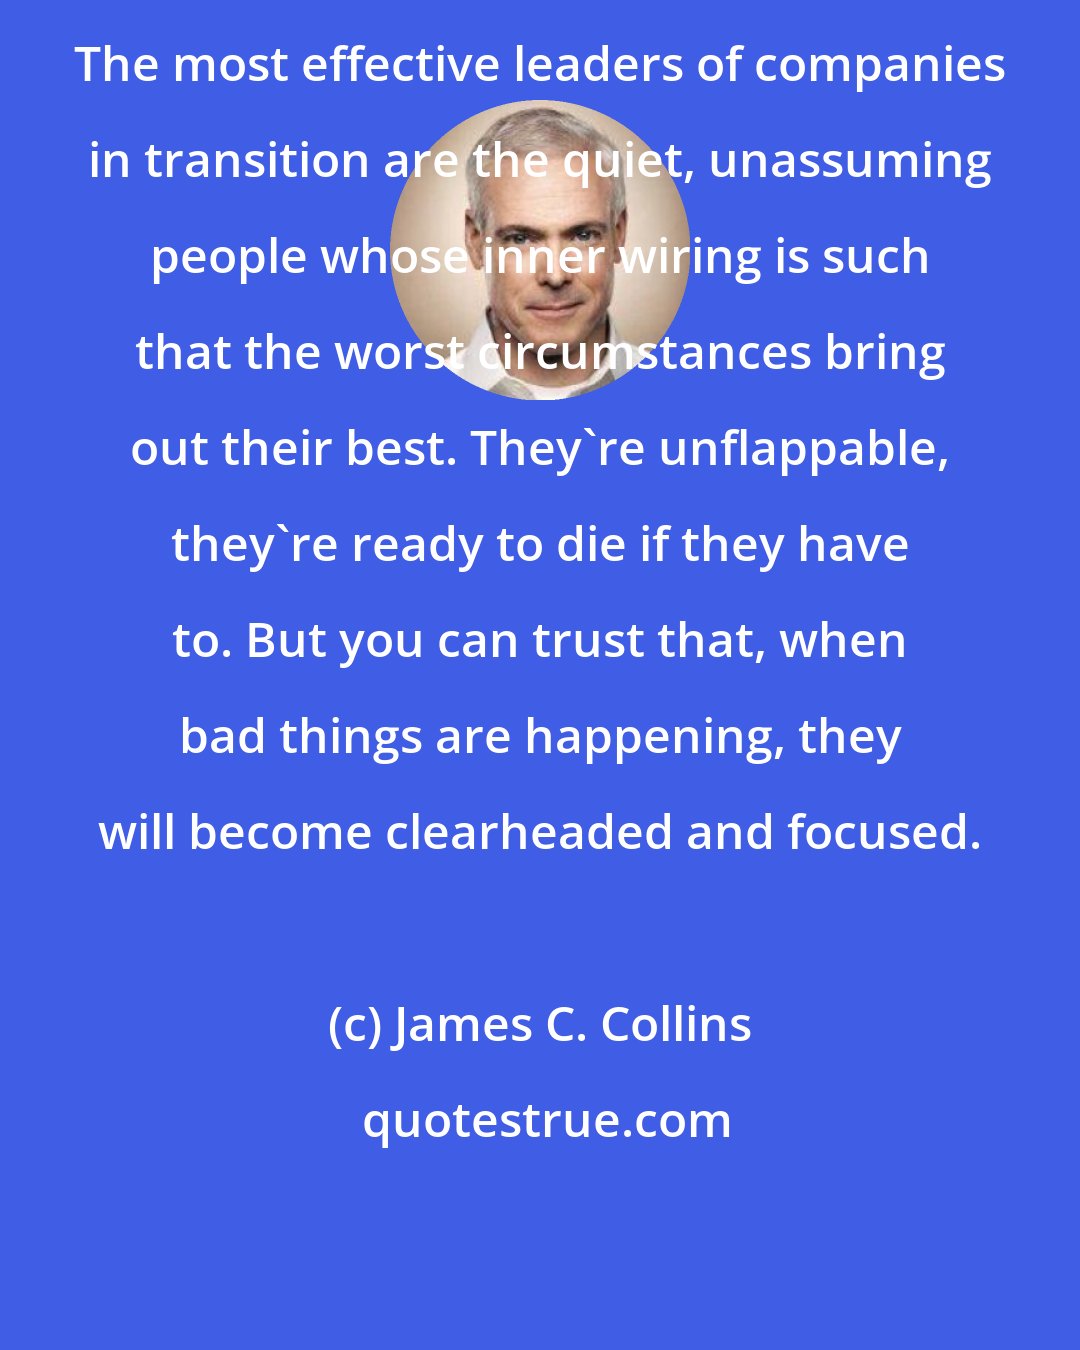 James C. Collins: The most effective leaders of companies in transition are the quiet, unassuming people whose inner wiring is such that the worst circumstances bring out their best. They're unflappable, they're ready to die if they have to. But you can trust that, when bad things are happening, they will become clearheaded and focused.